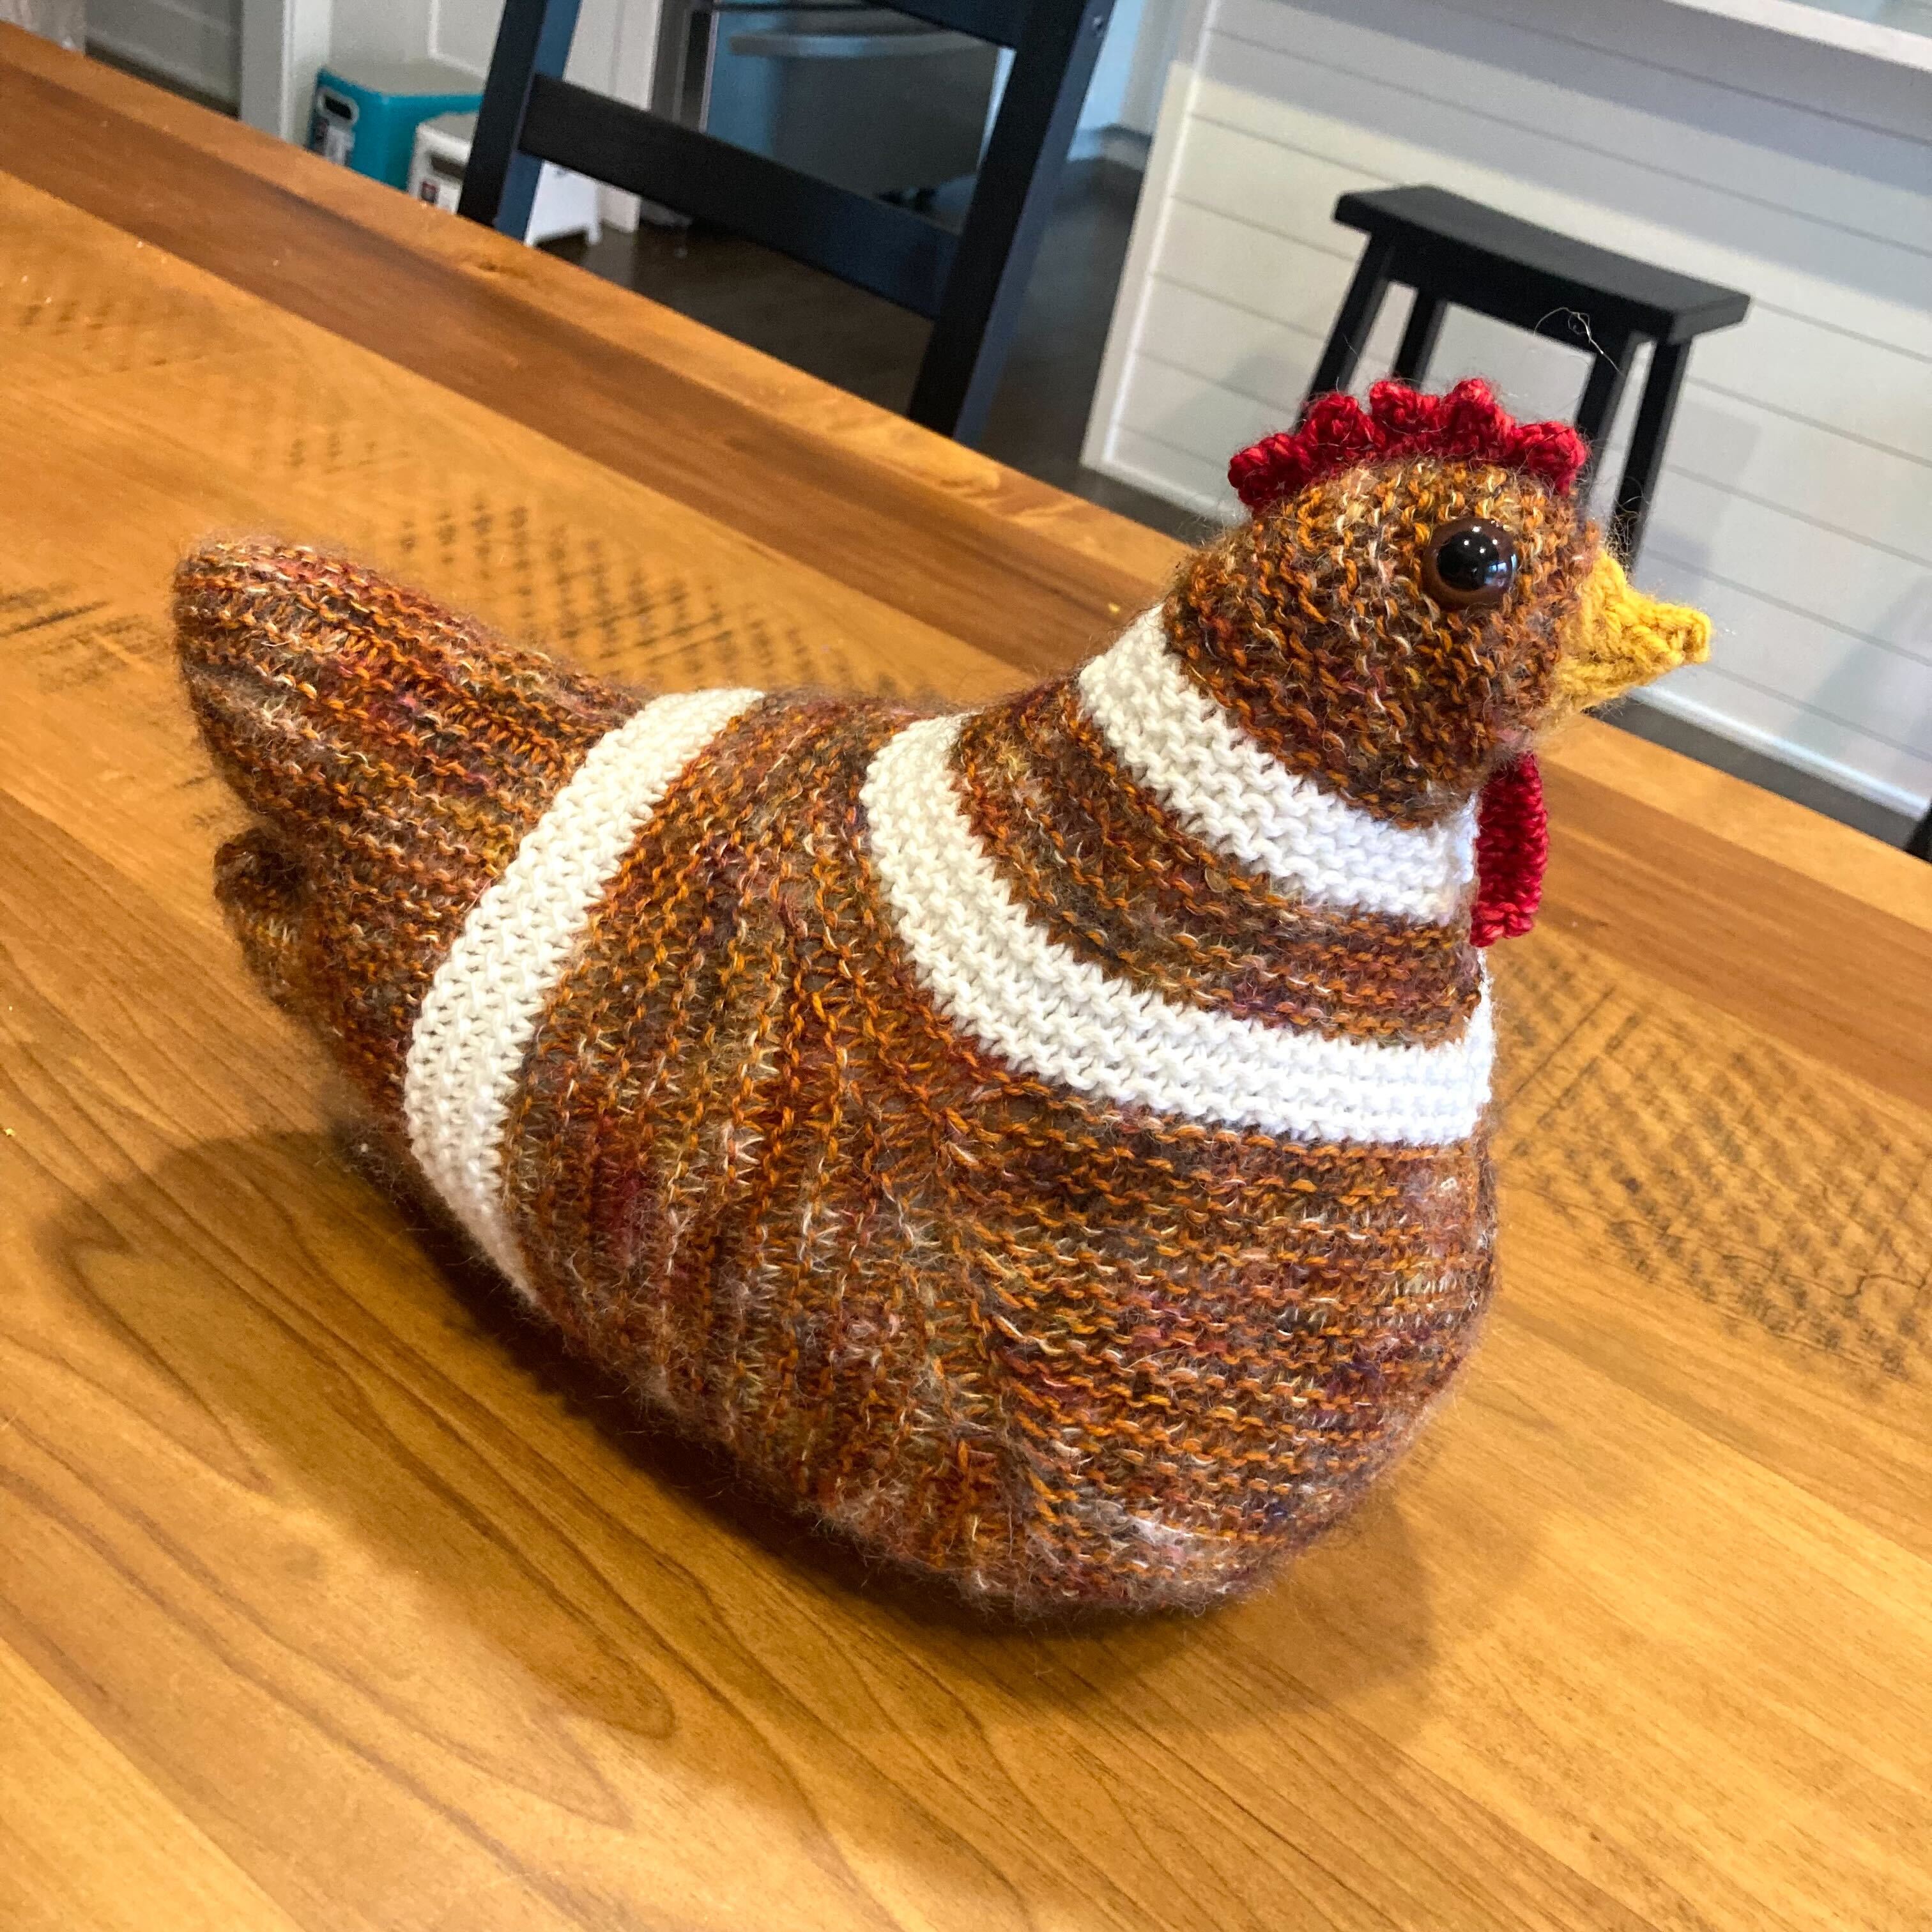 Emotional Support Chicken Meet-up (p) - May 19